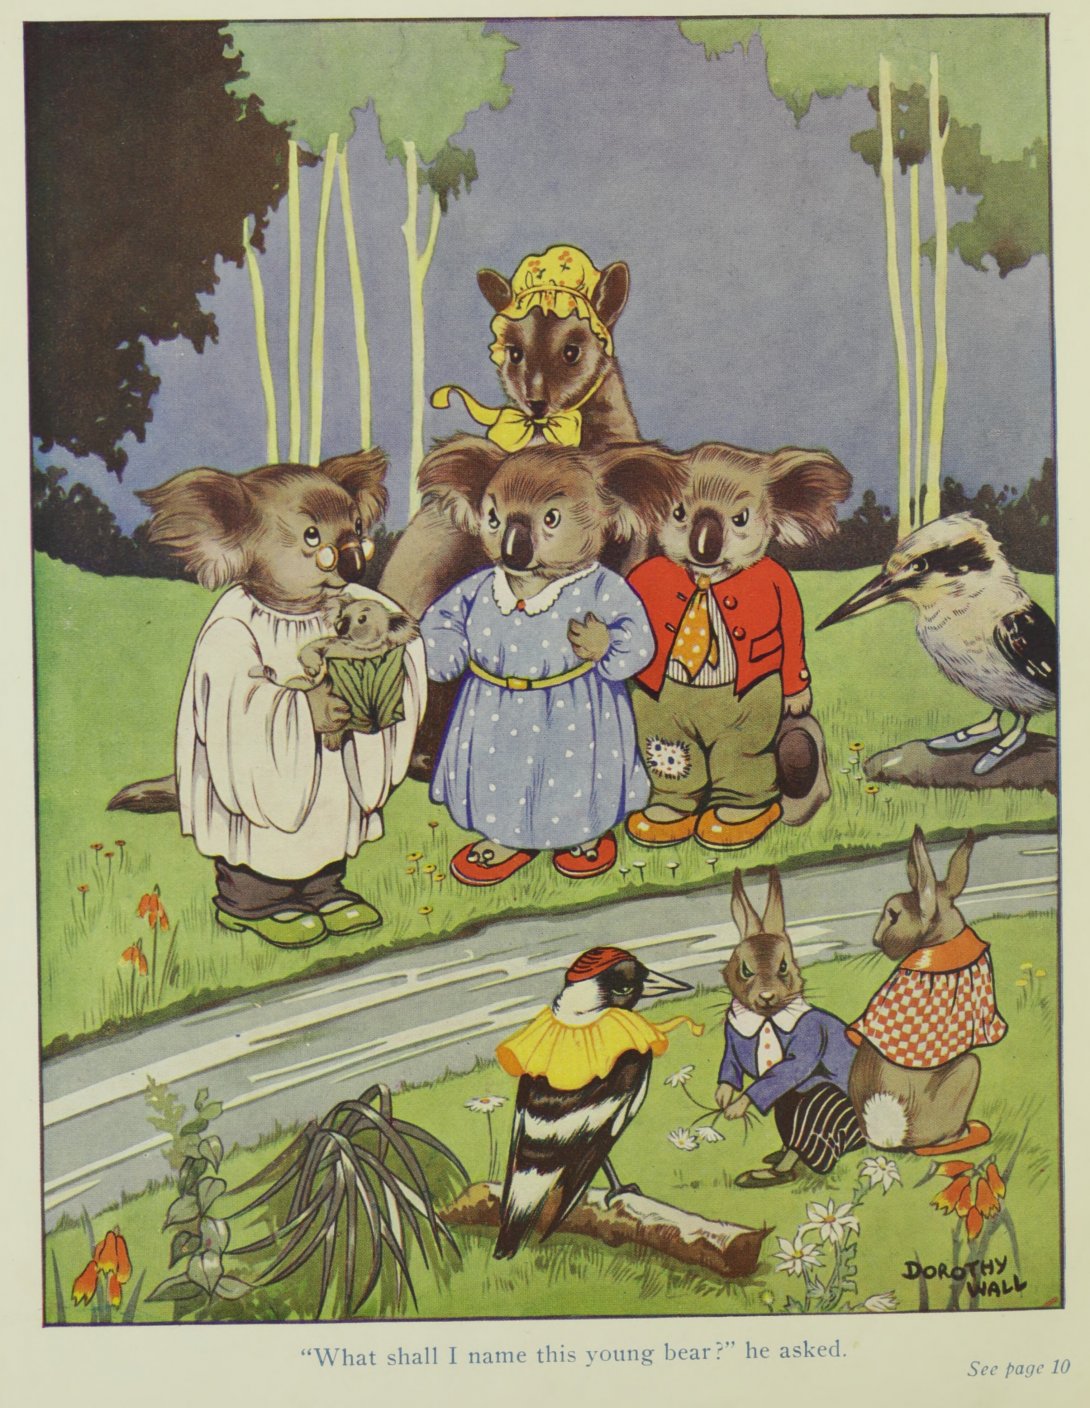 Illustration from a children's book shows a group of koalas dressed in clothing stood near a river. One is holding a baby koala.